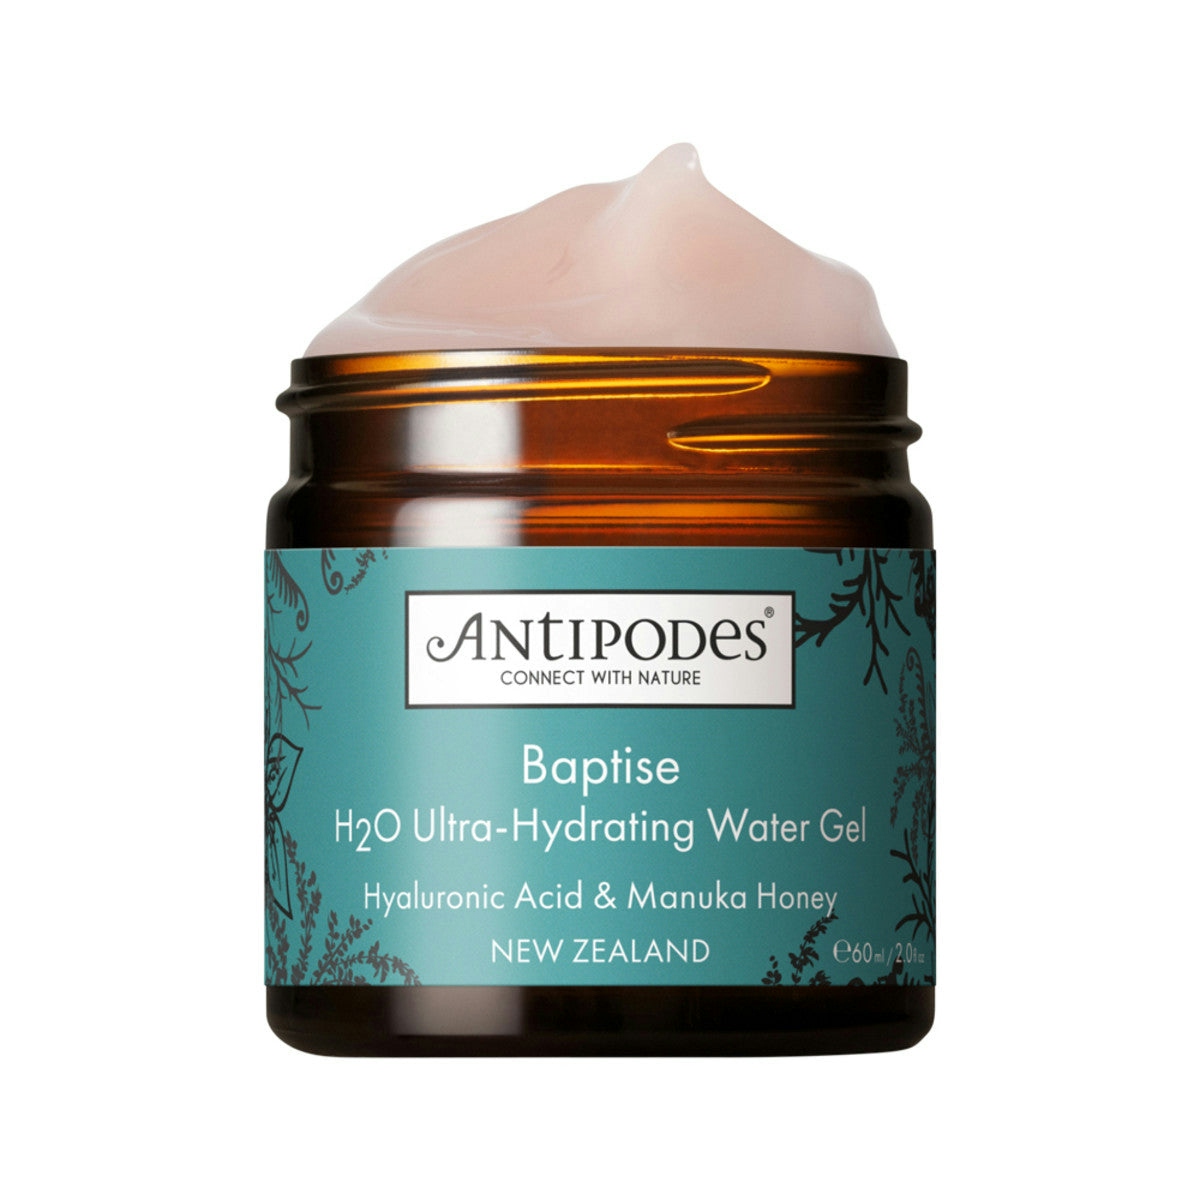 image of Antipodes Baptise H2O Ultra-Hydrating Water Gel 60ml on white background 